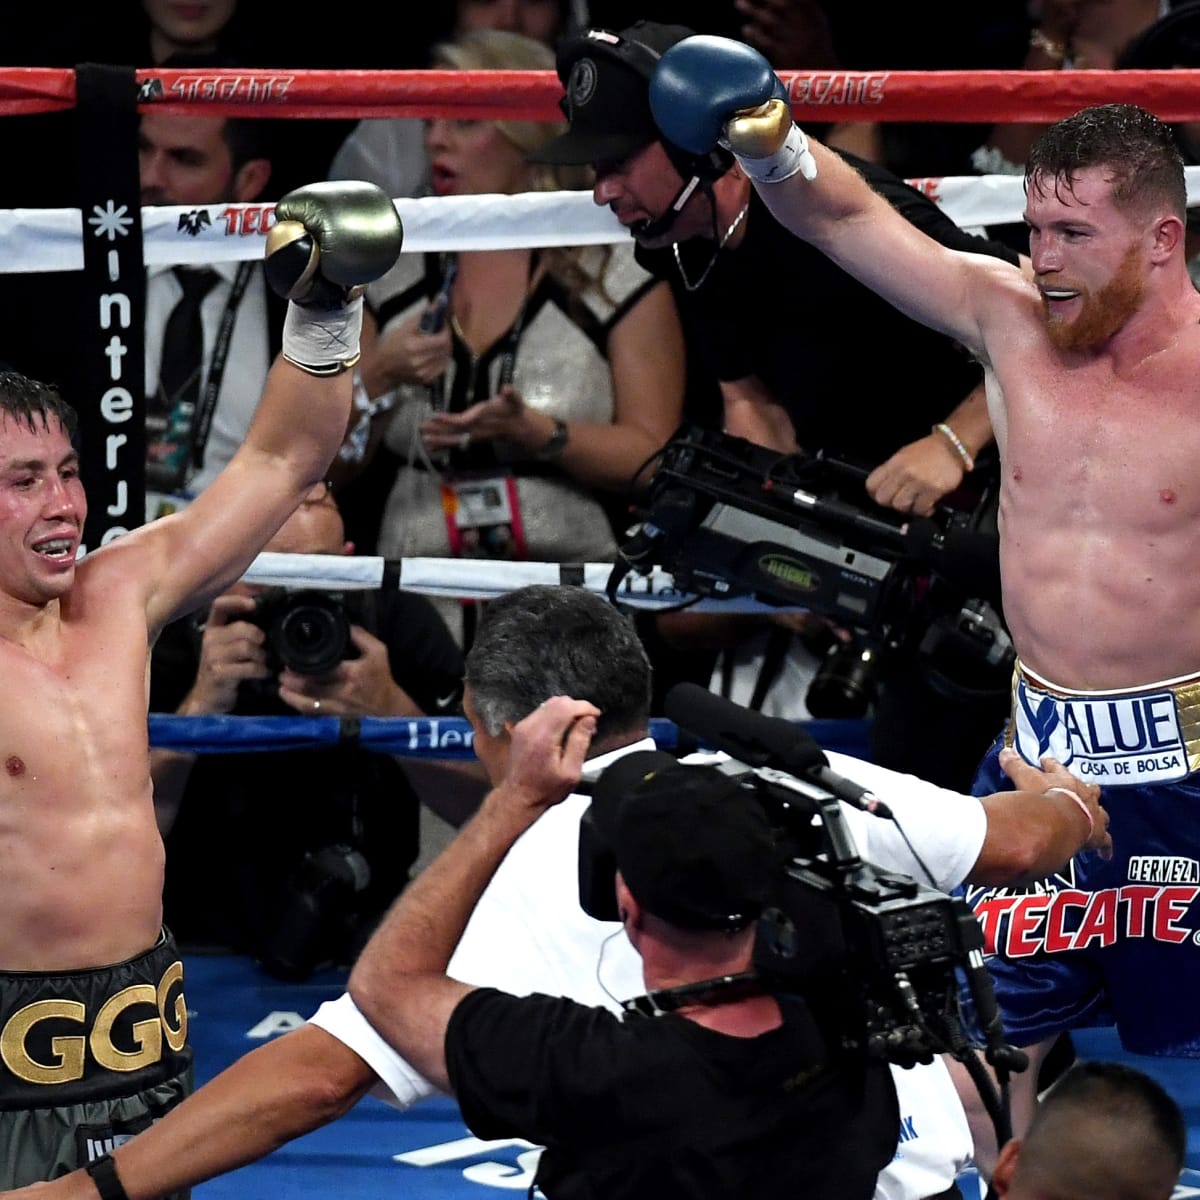 Canelo vs GGG rematch How can I watch the fight for free?